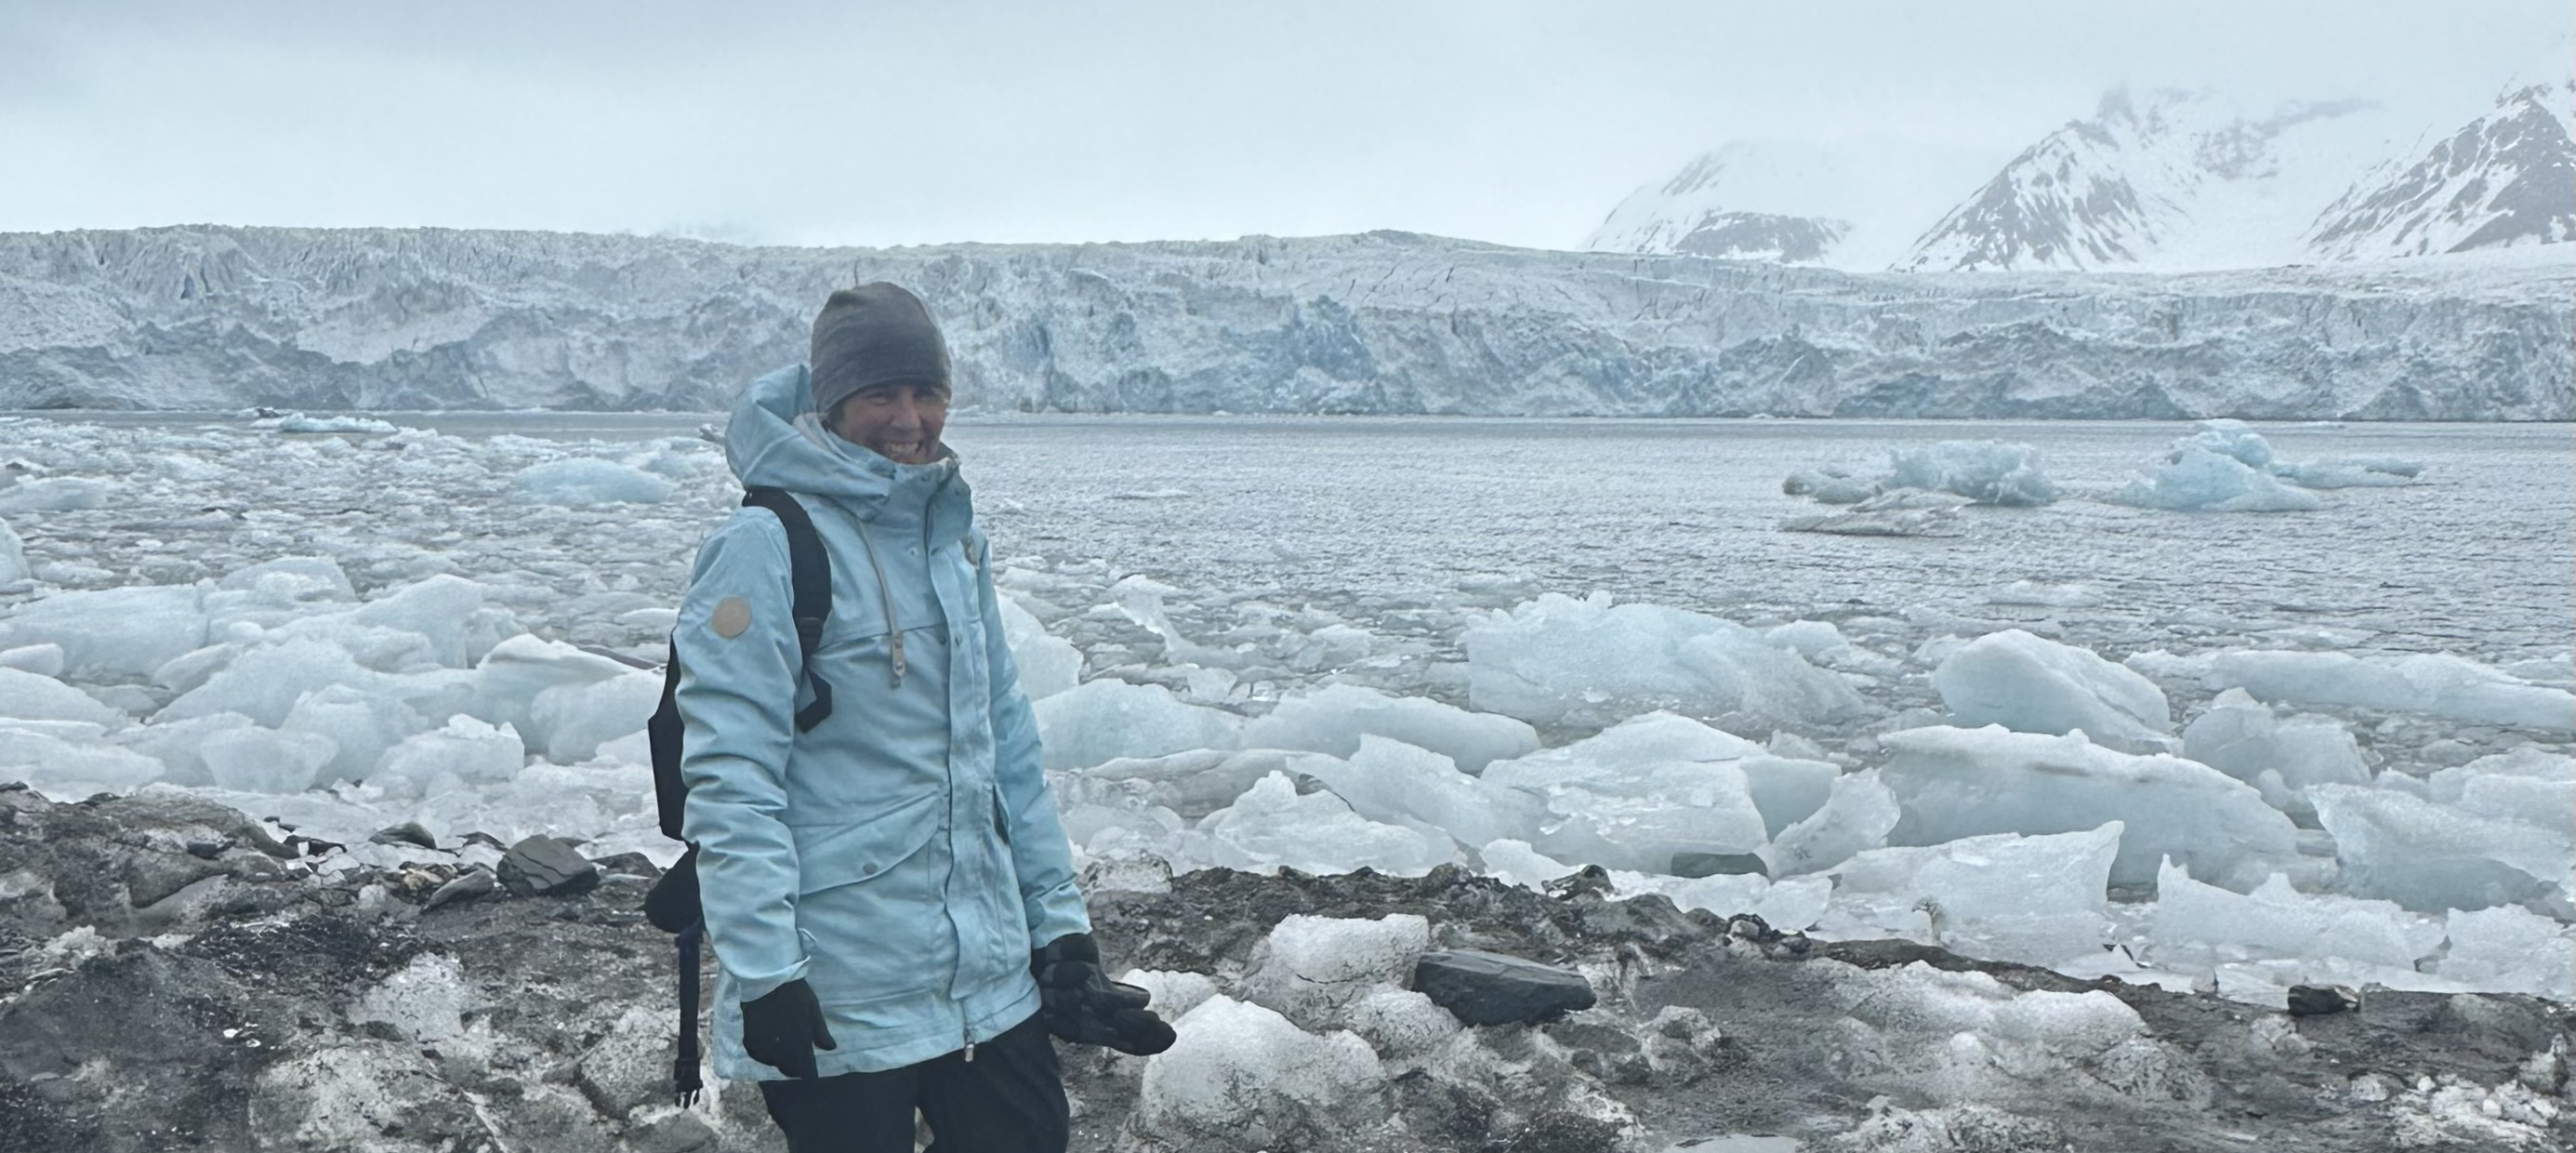 A photograph of Michele Barker in an Arctic landscape. She is wearing polar clothing, behind her is a white icy landscape with mountains in the distance. 